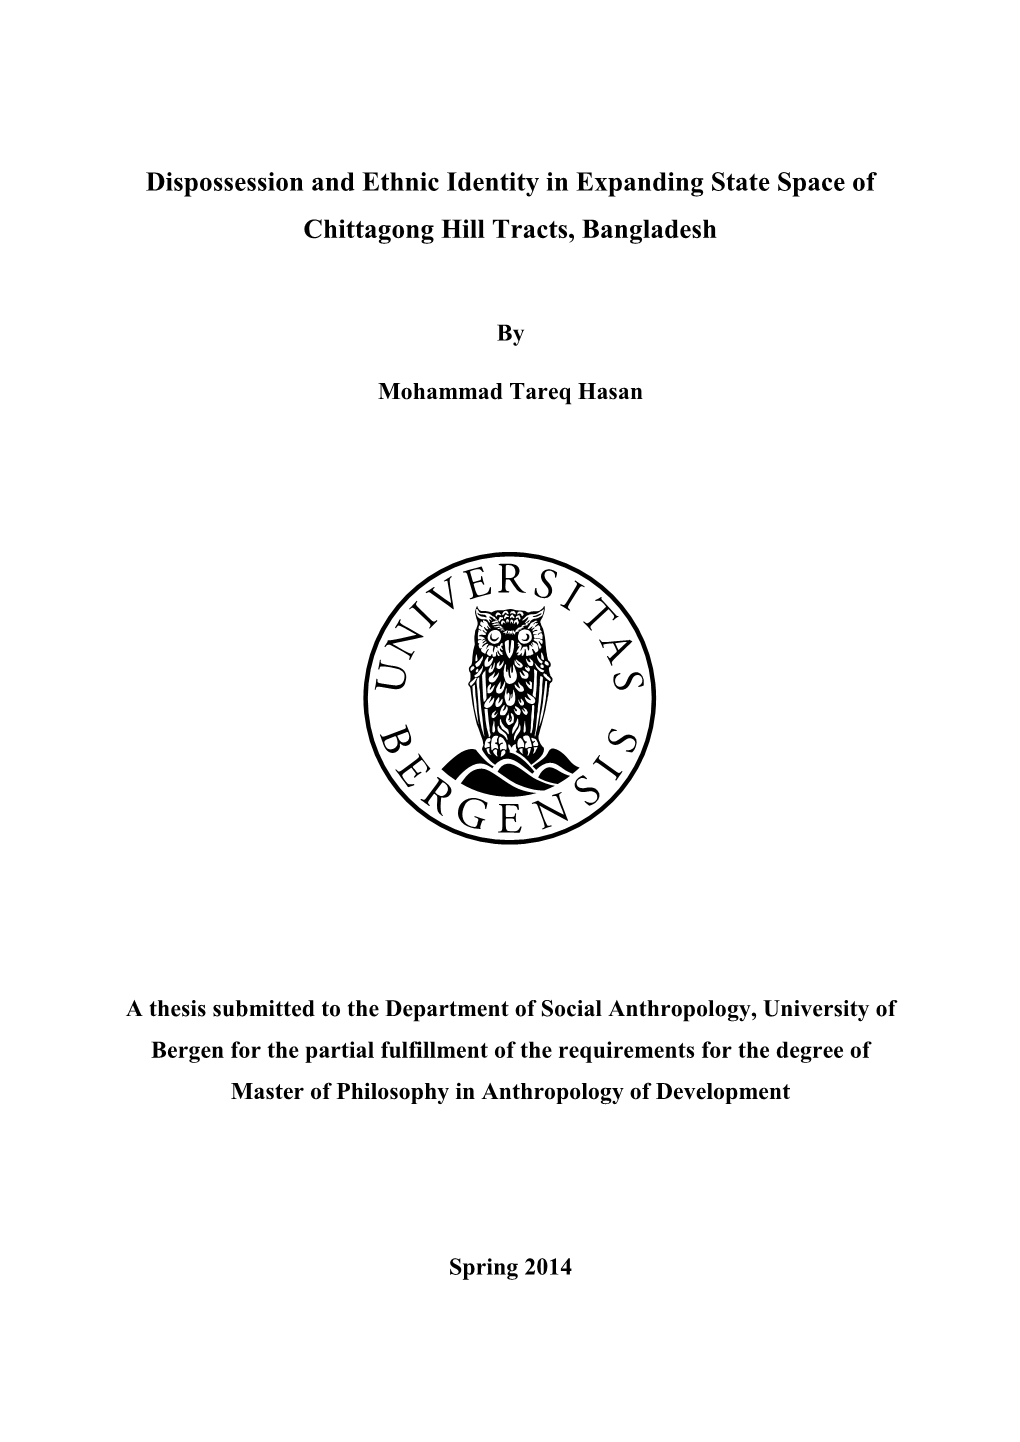 Dispossession and Ethnic Identity in Expanding State Space of Chittagong Hill Tracts, Bangladesh